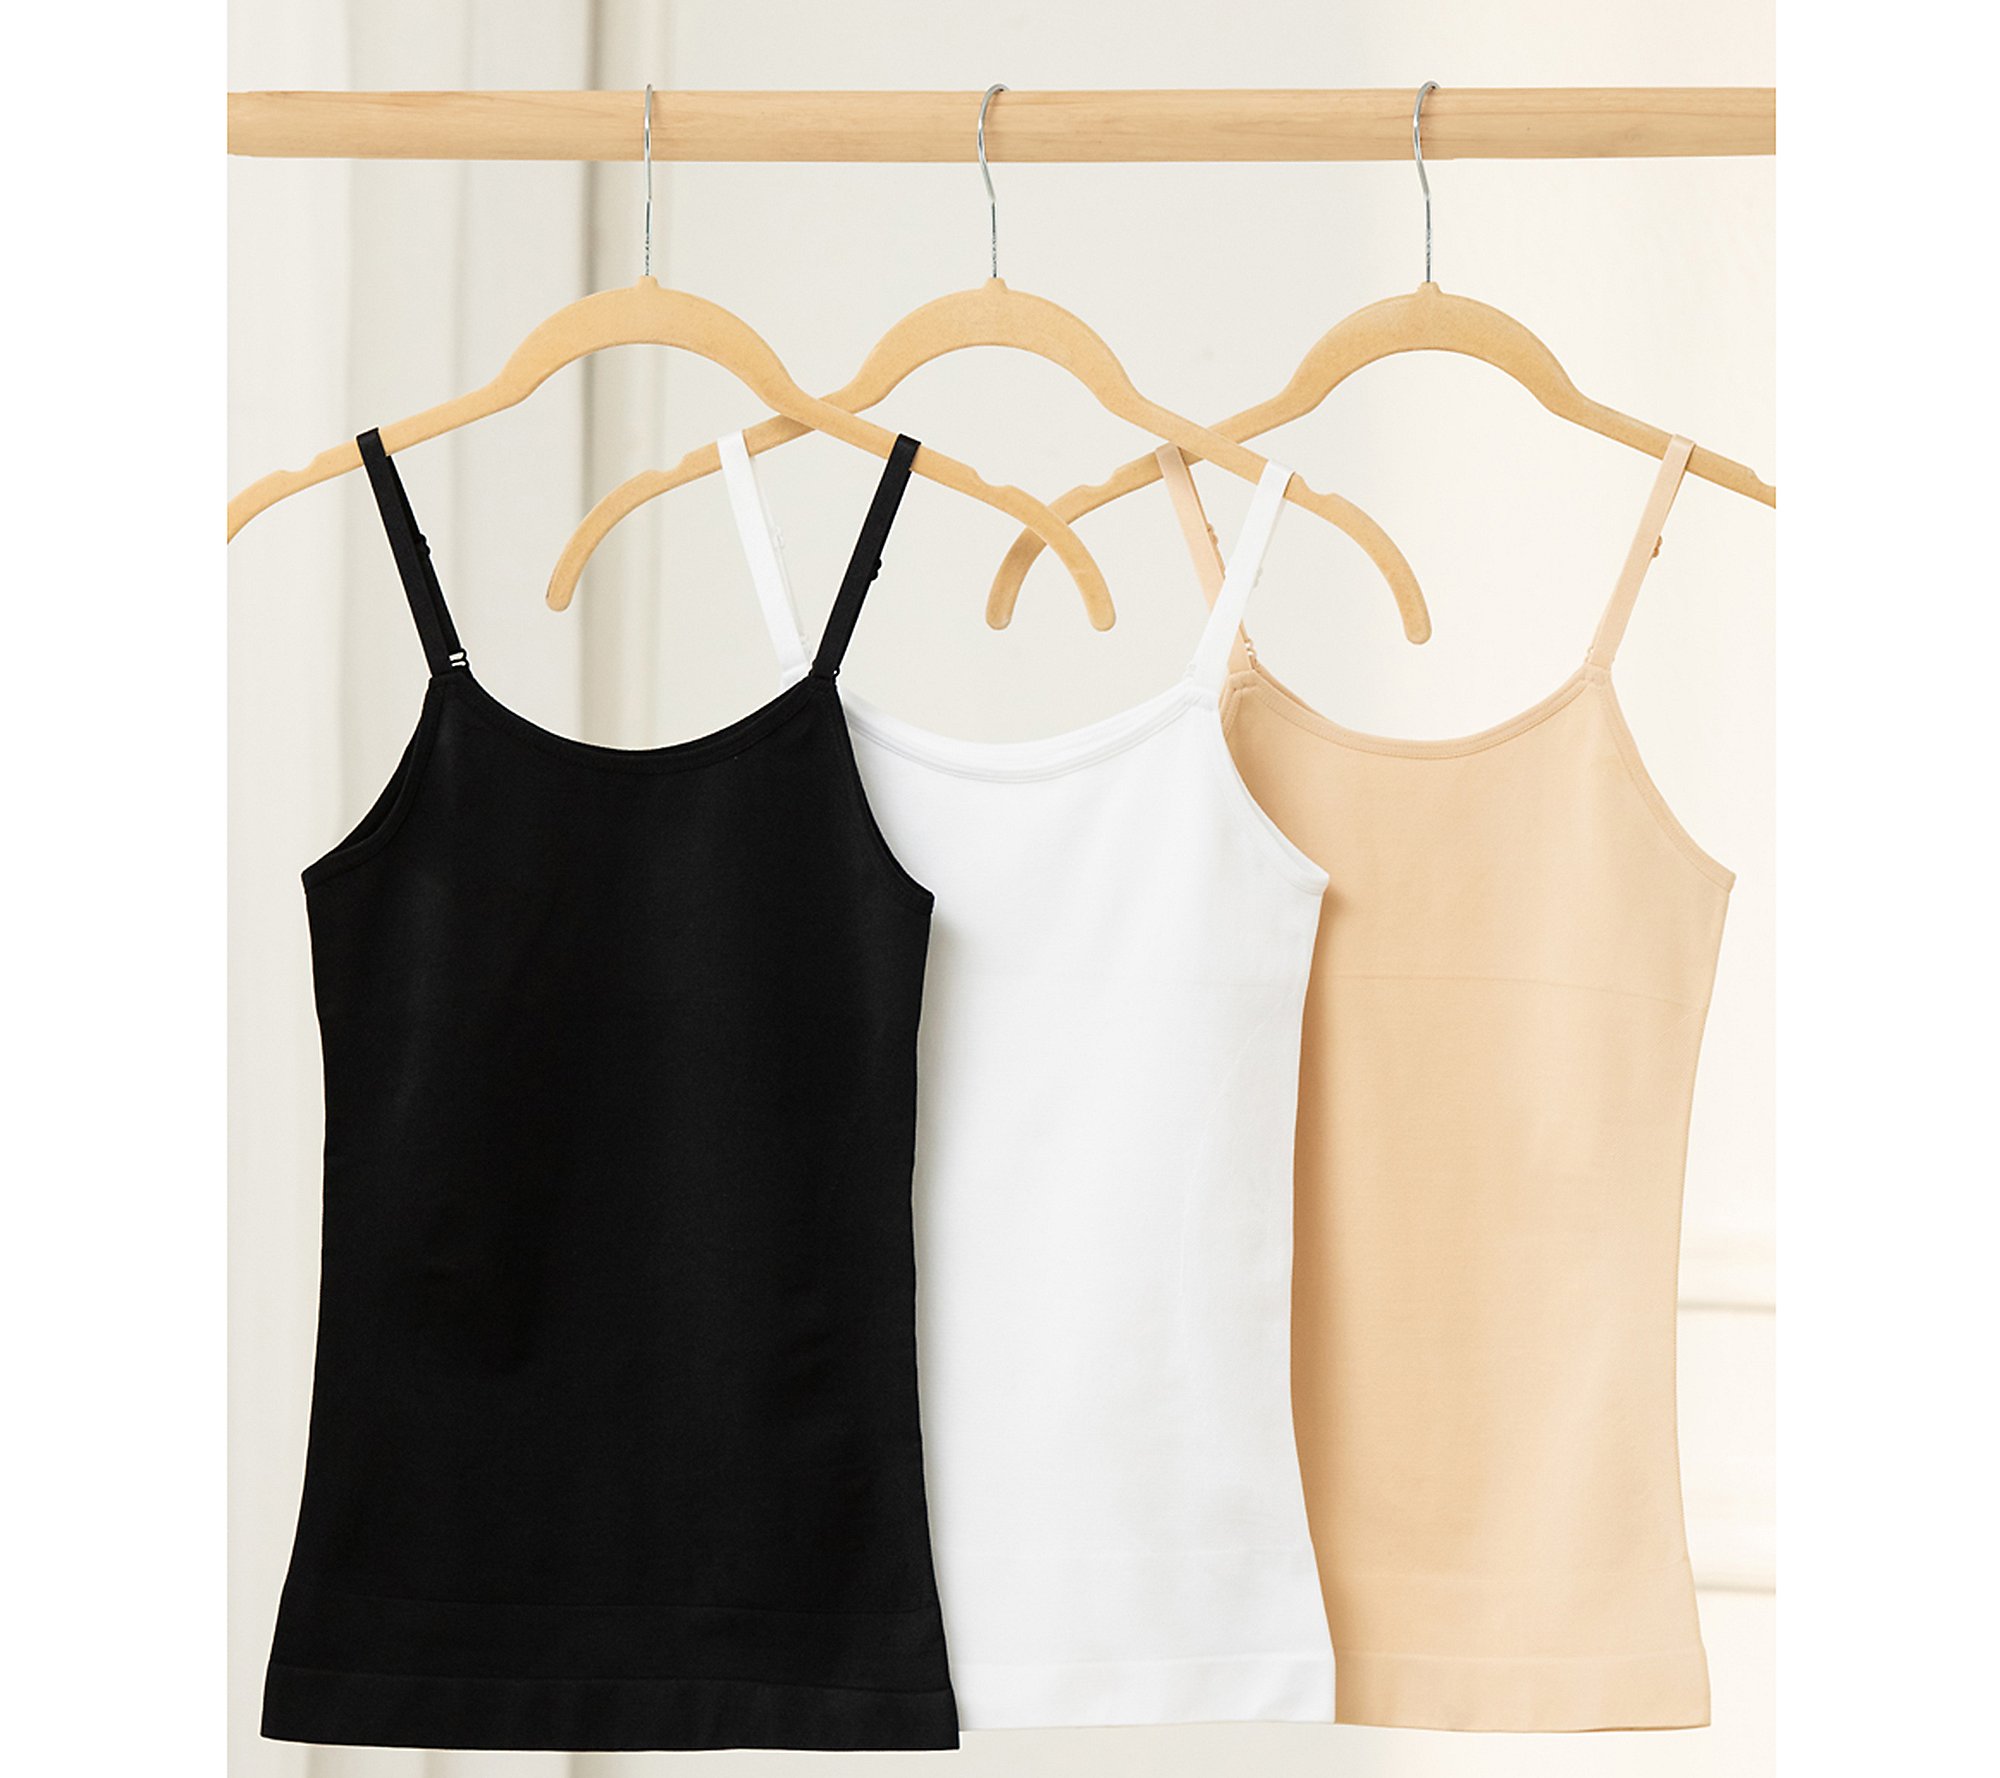 NWT $40 Shapermint Essentials [ 2XL ] Scoop Neck Cami - Free Shipping